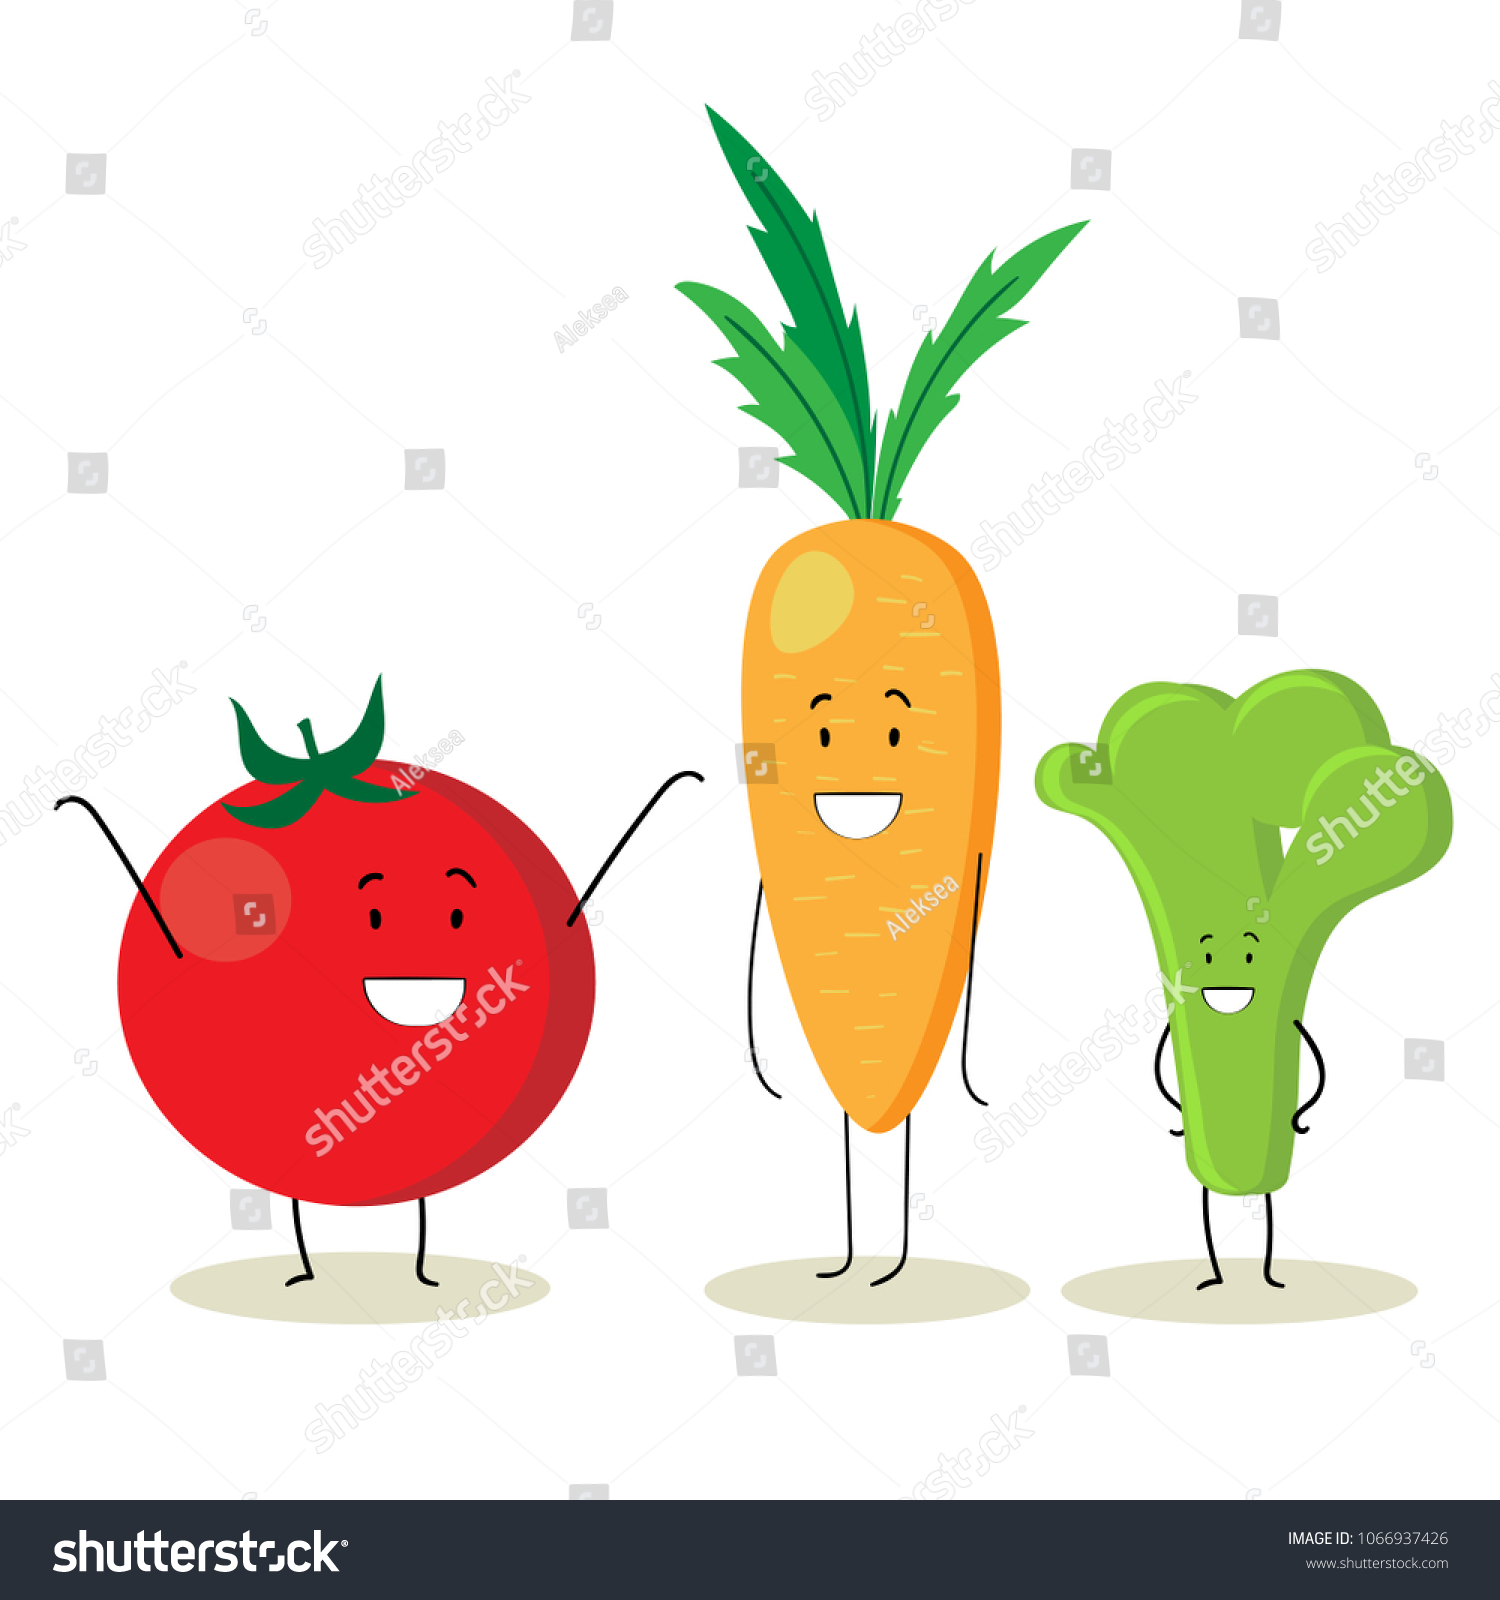 Stock vector cartoon vegetable cute characters face isolated on white background vector illustration funny 1066937426